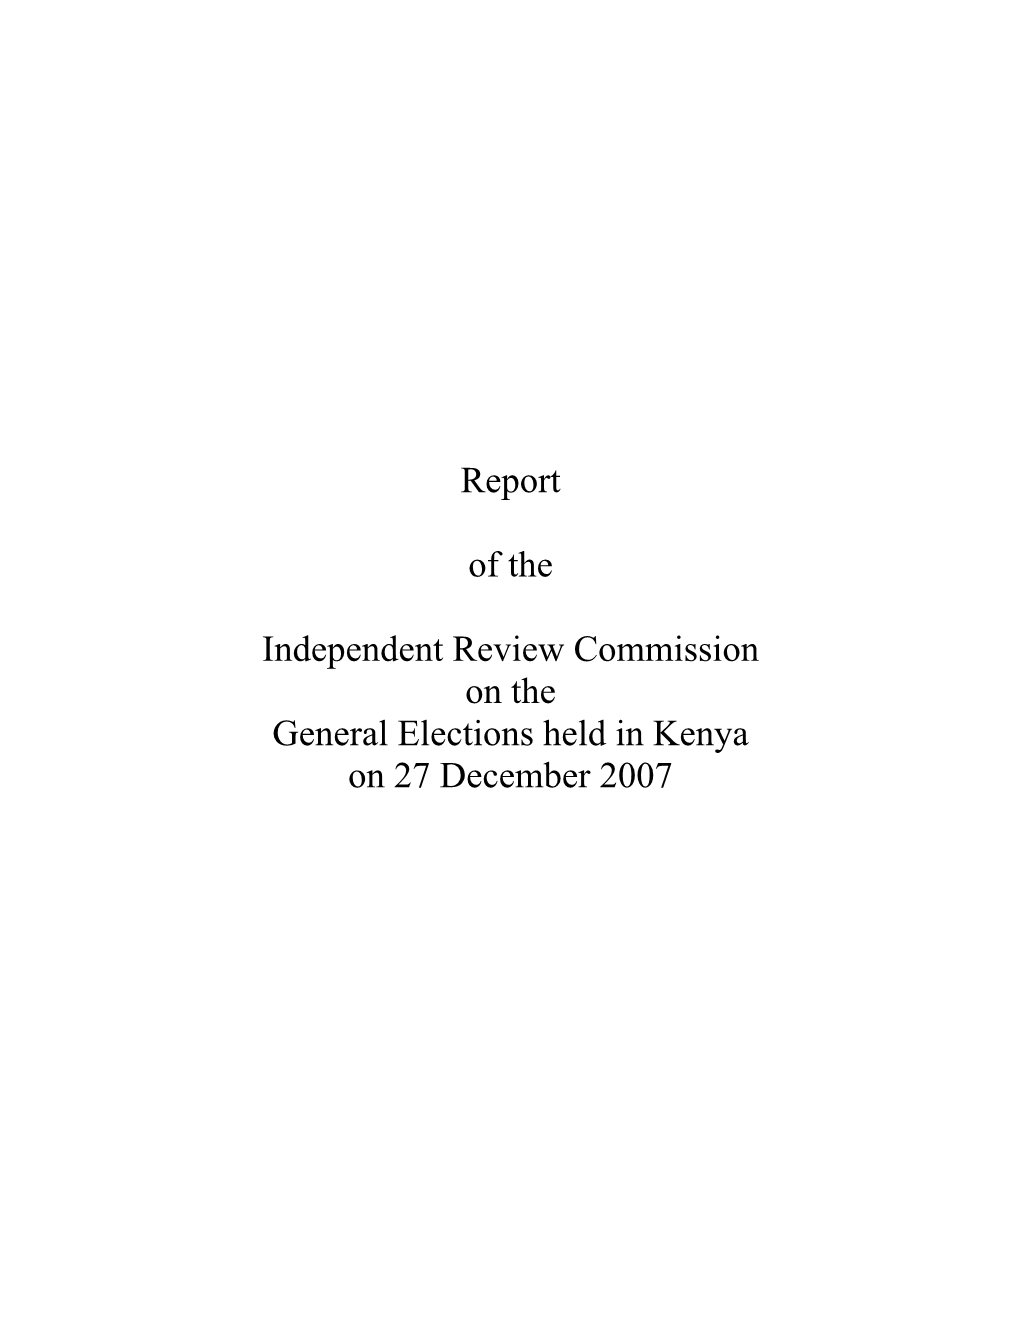 Independent Review Commission on the General Elections Held in Kenya on 27 December 2007